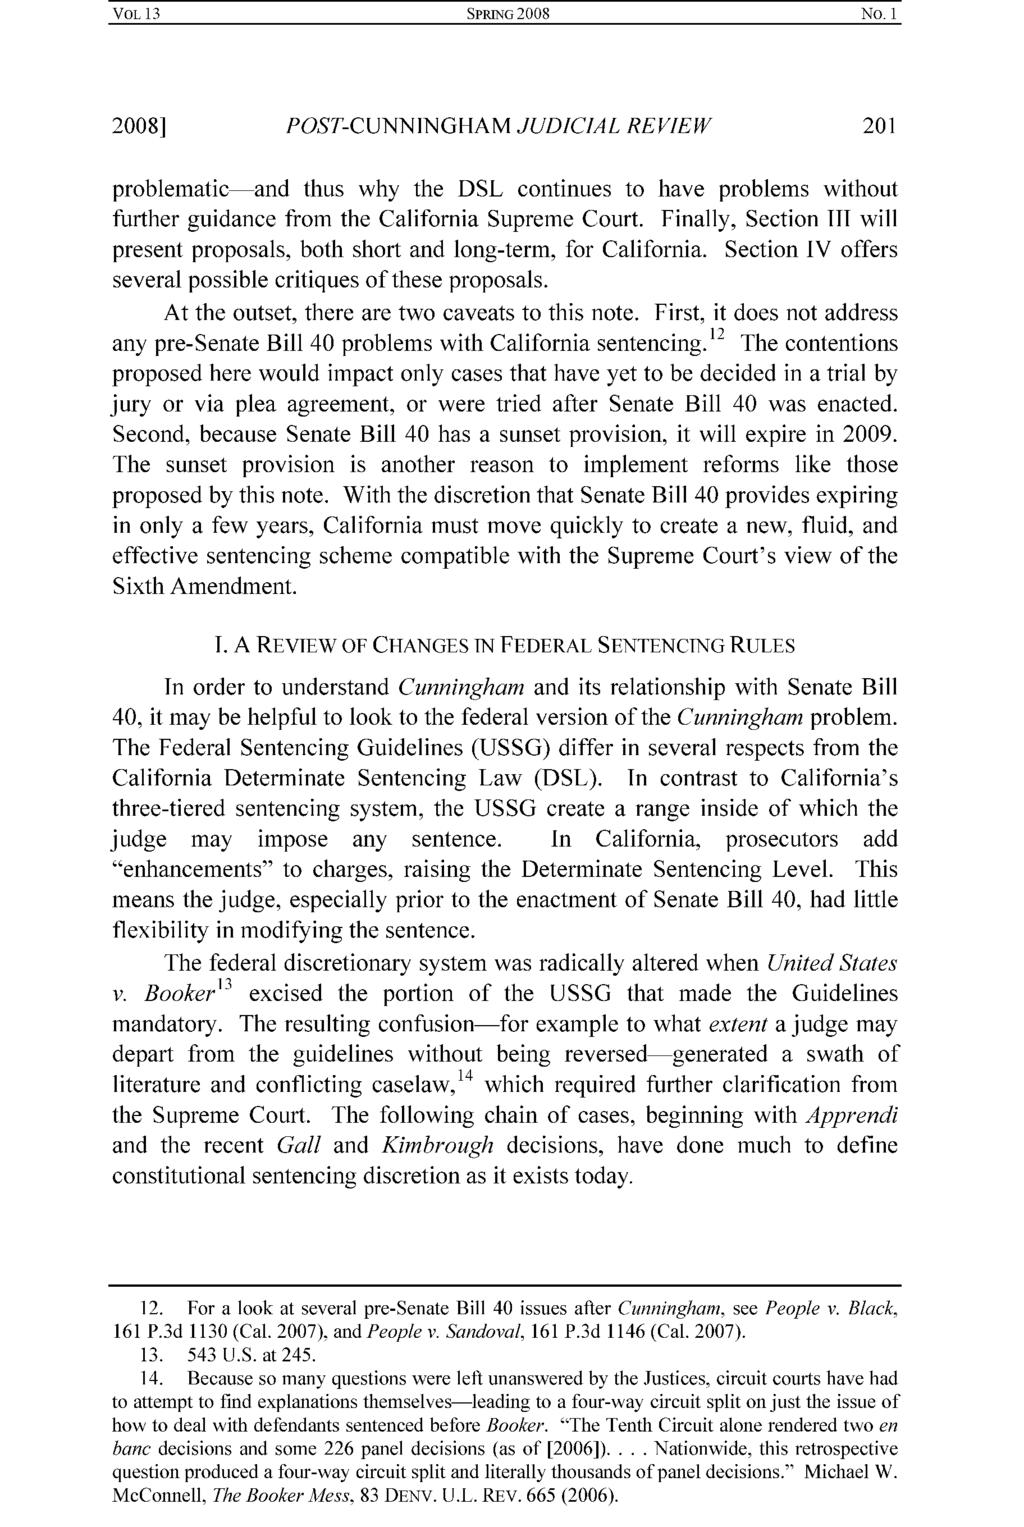 2008] POST-CUNNINGHAM JUDICIAL REVIEW 201 problematic and thus why the DSL continues to have problems without further guidance from the California Supreme Court.